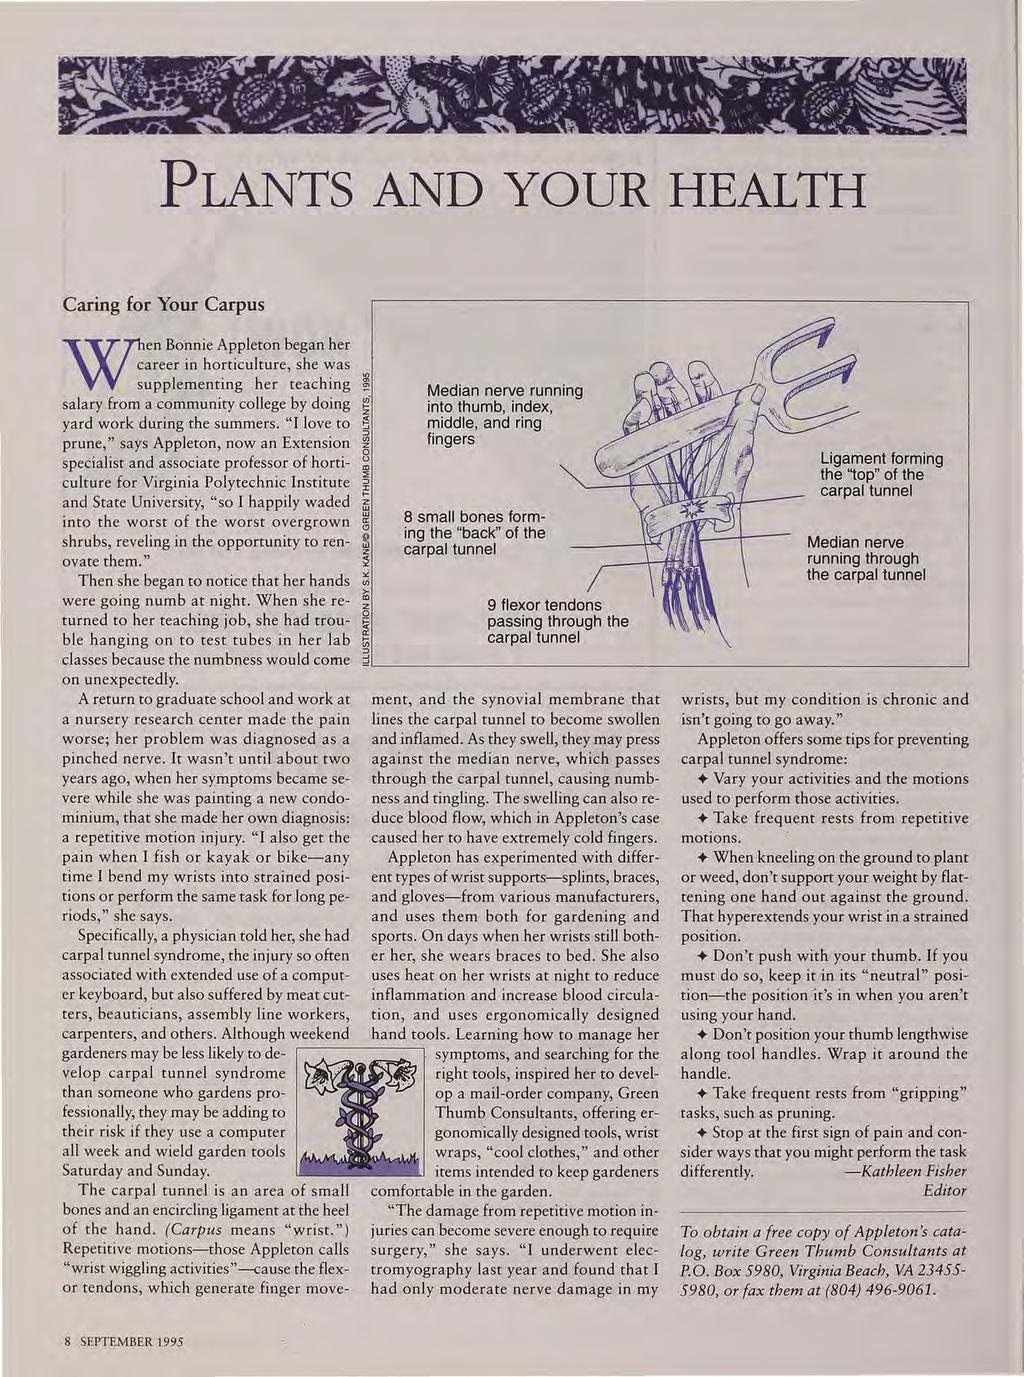 PLANTS AND YOUR HEALTH Caring for Your Carpus W en Bonnie Appleton began her career in horticulture, she was supplementing her teaching Median nerve running salary from a community college by doing